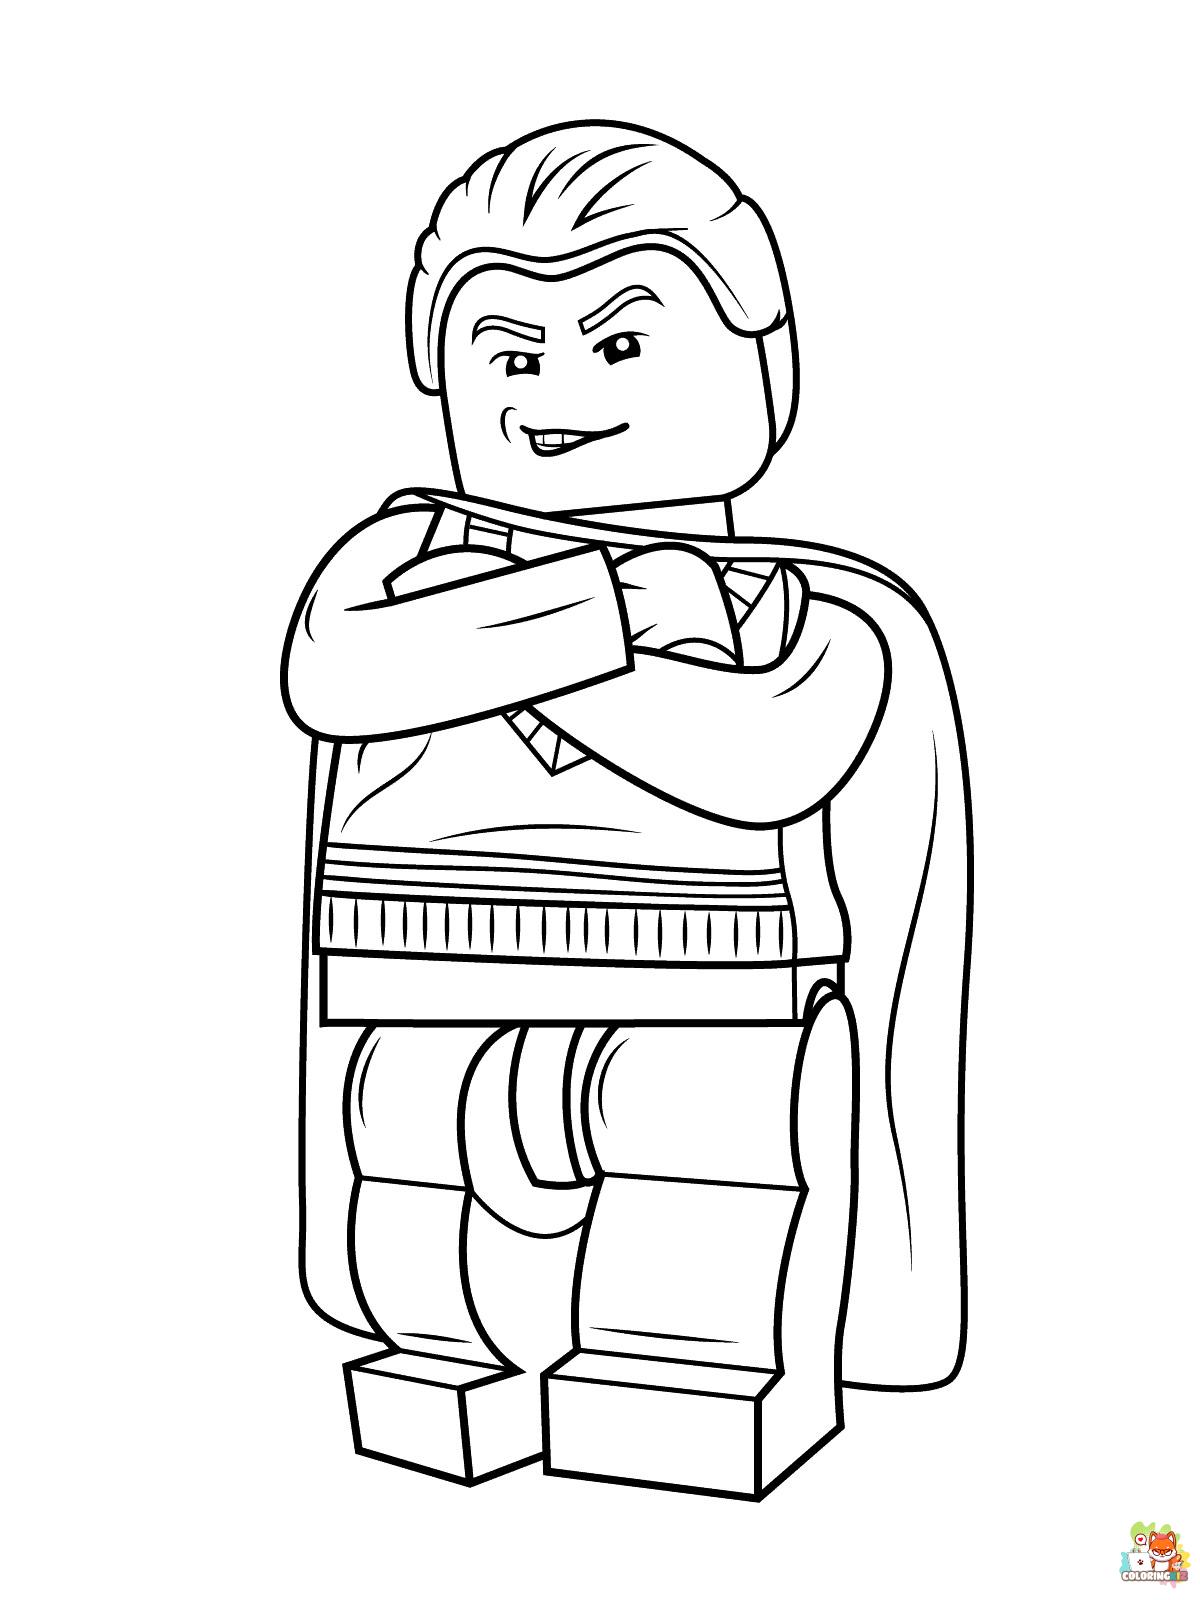 Lego Harry Potter Coloring Pages easy